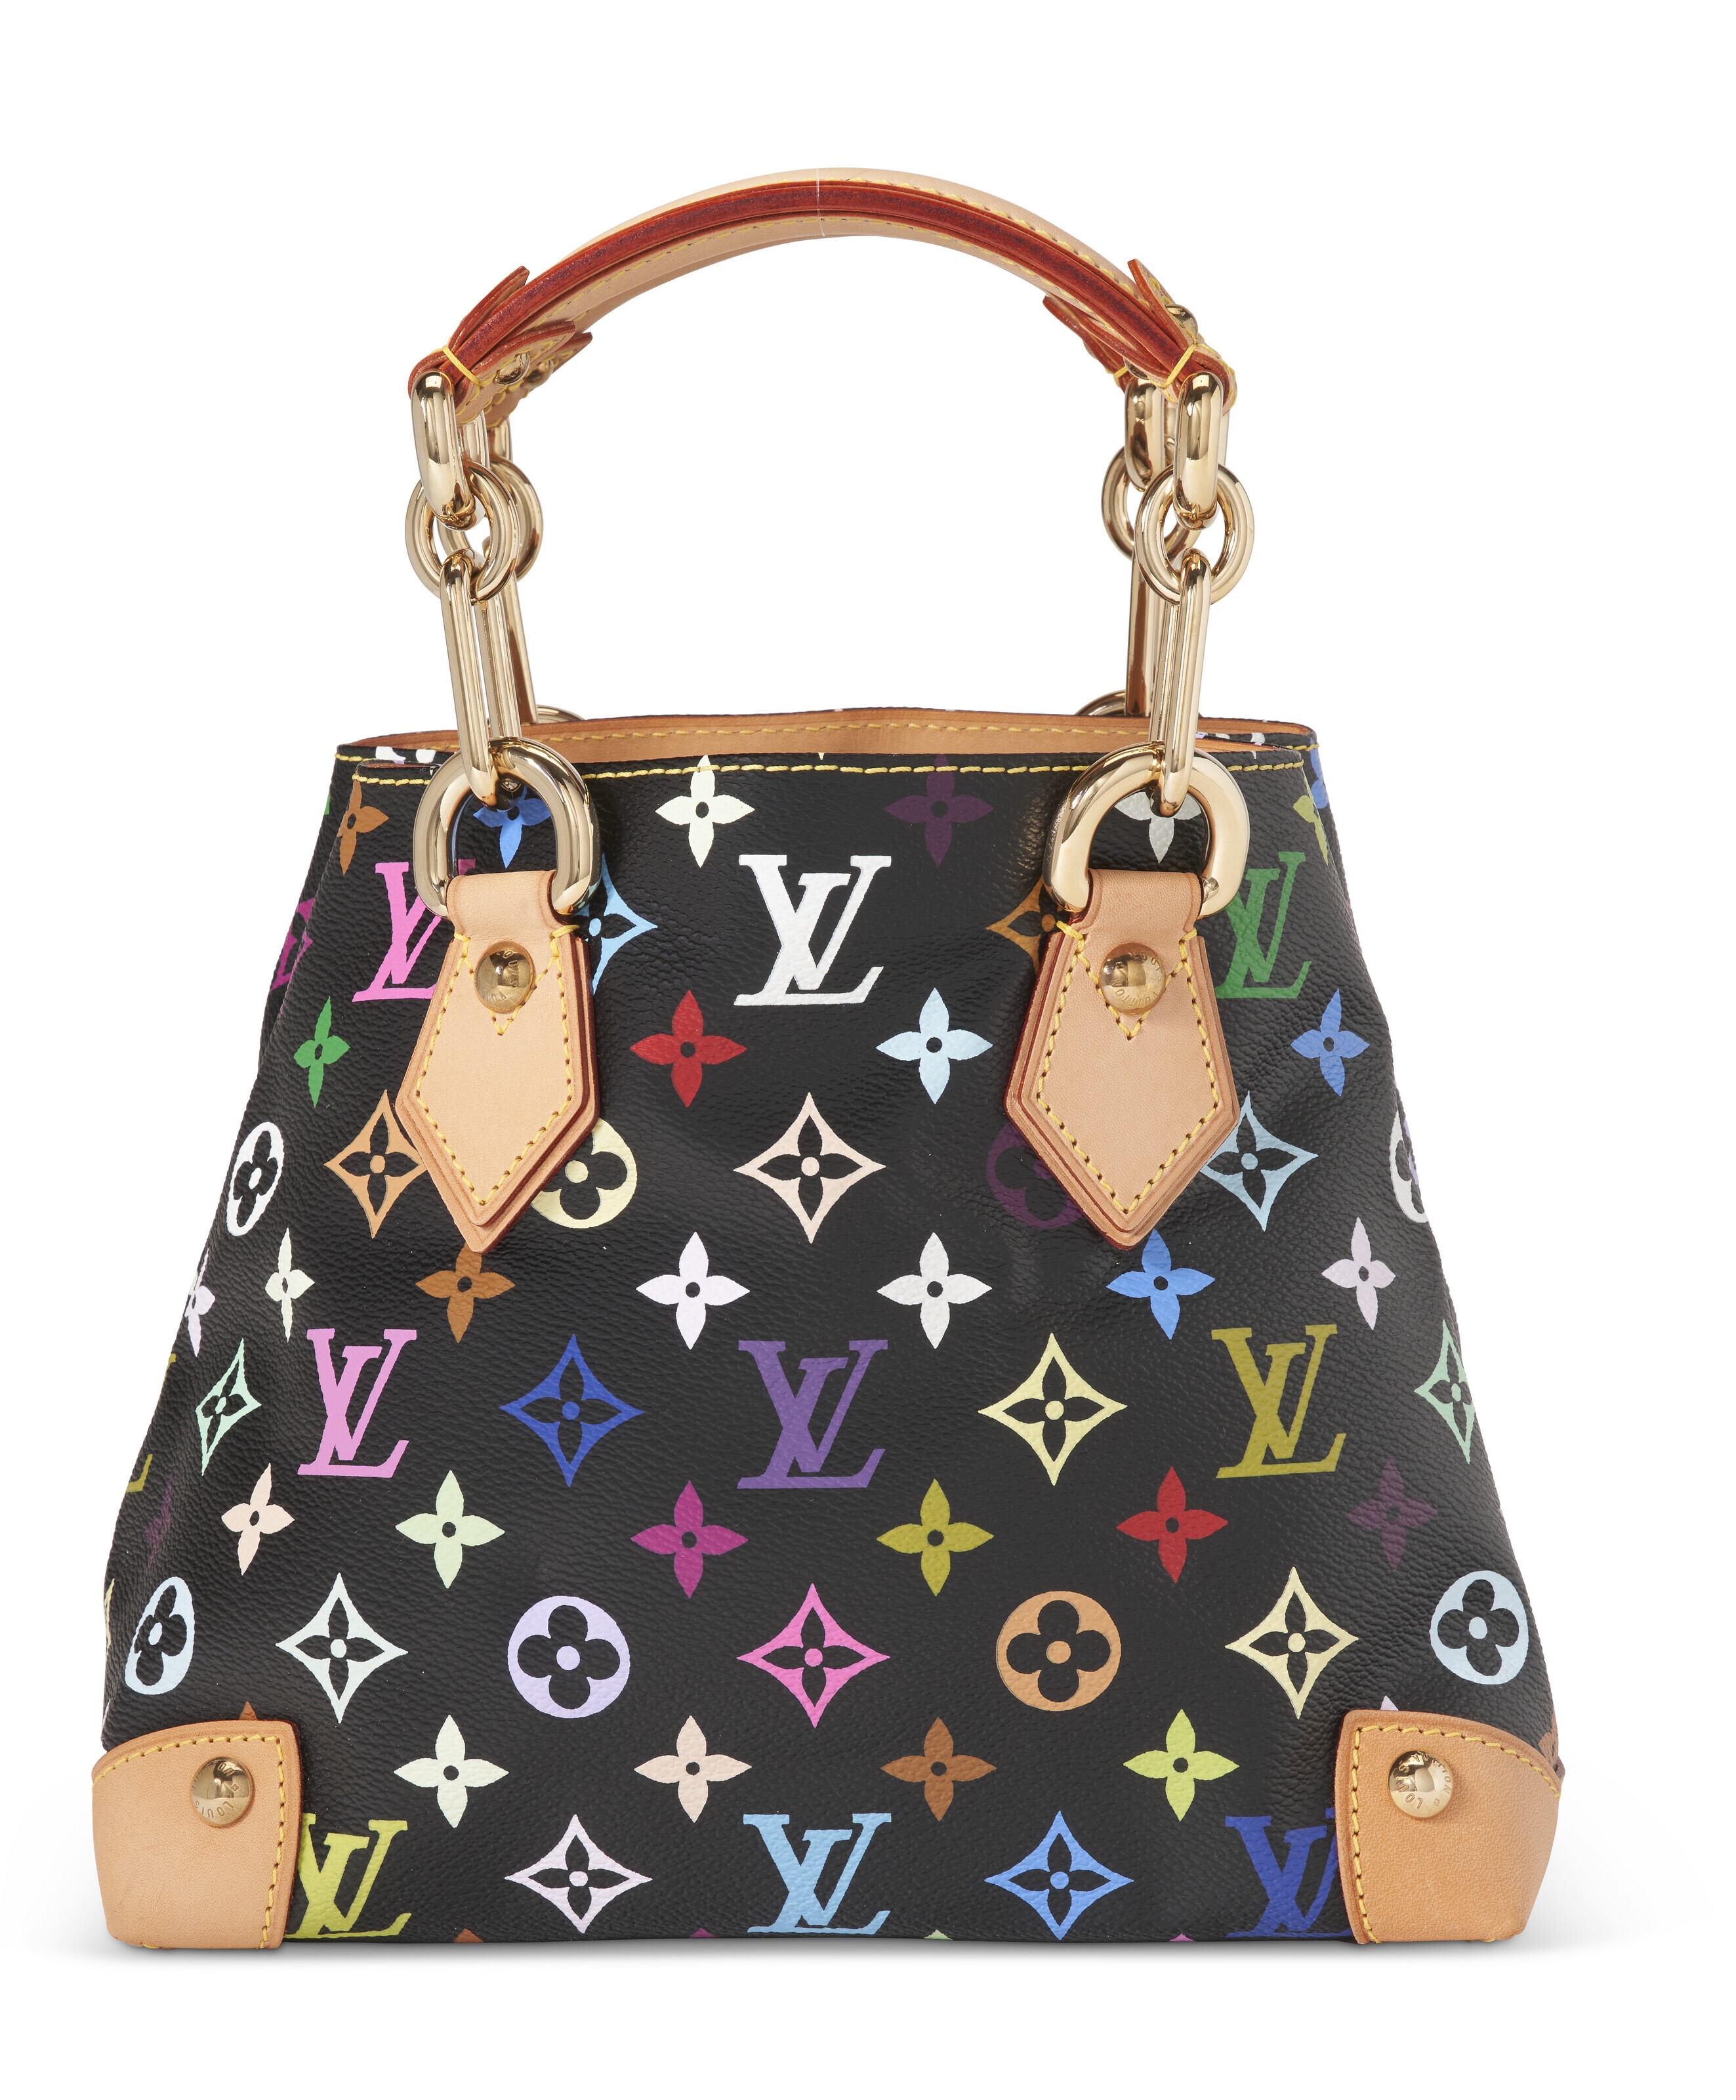 A LIMITED EDITION BLACK MONOGRAM MULTICOLORE COATED CANVAS AUDRA